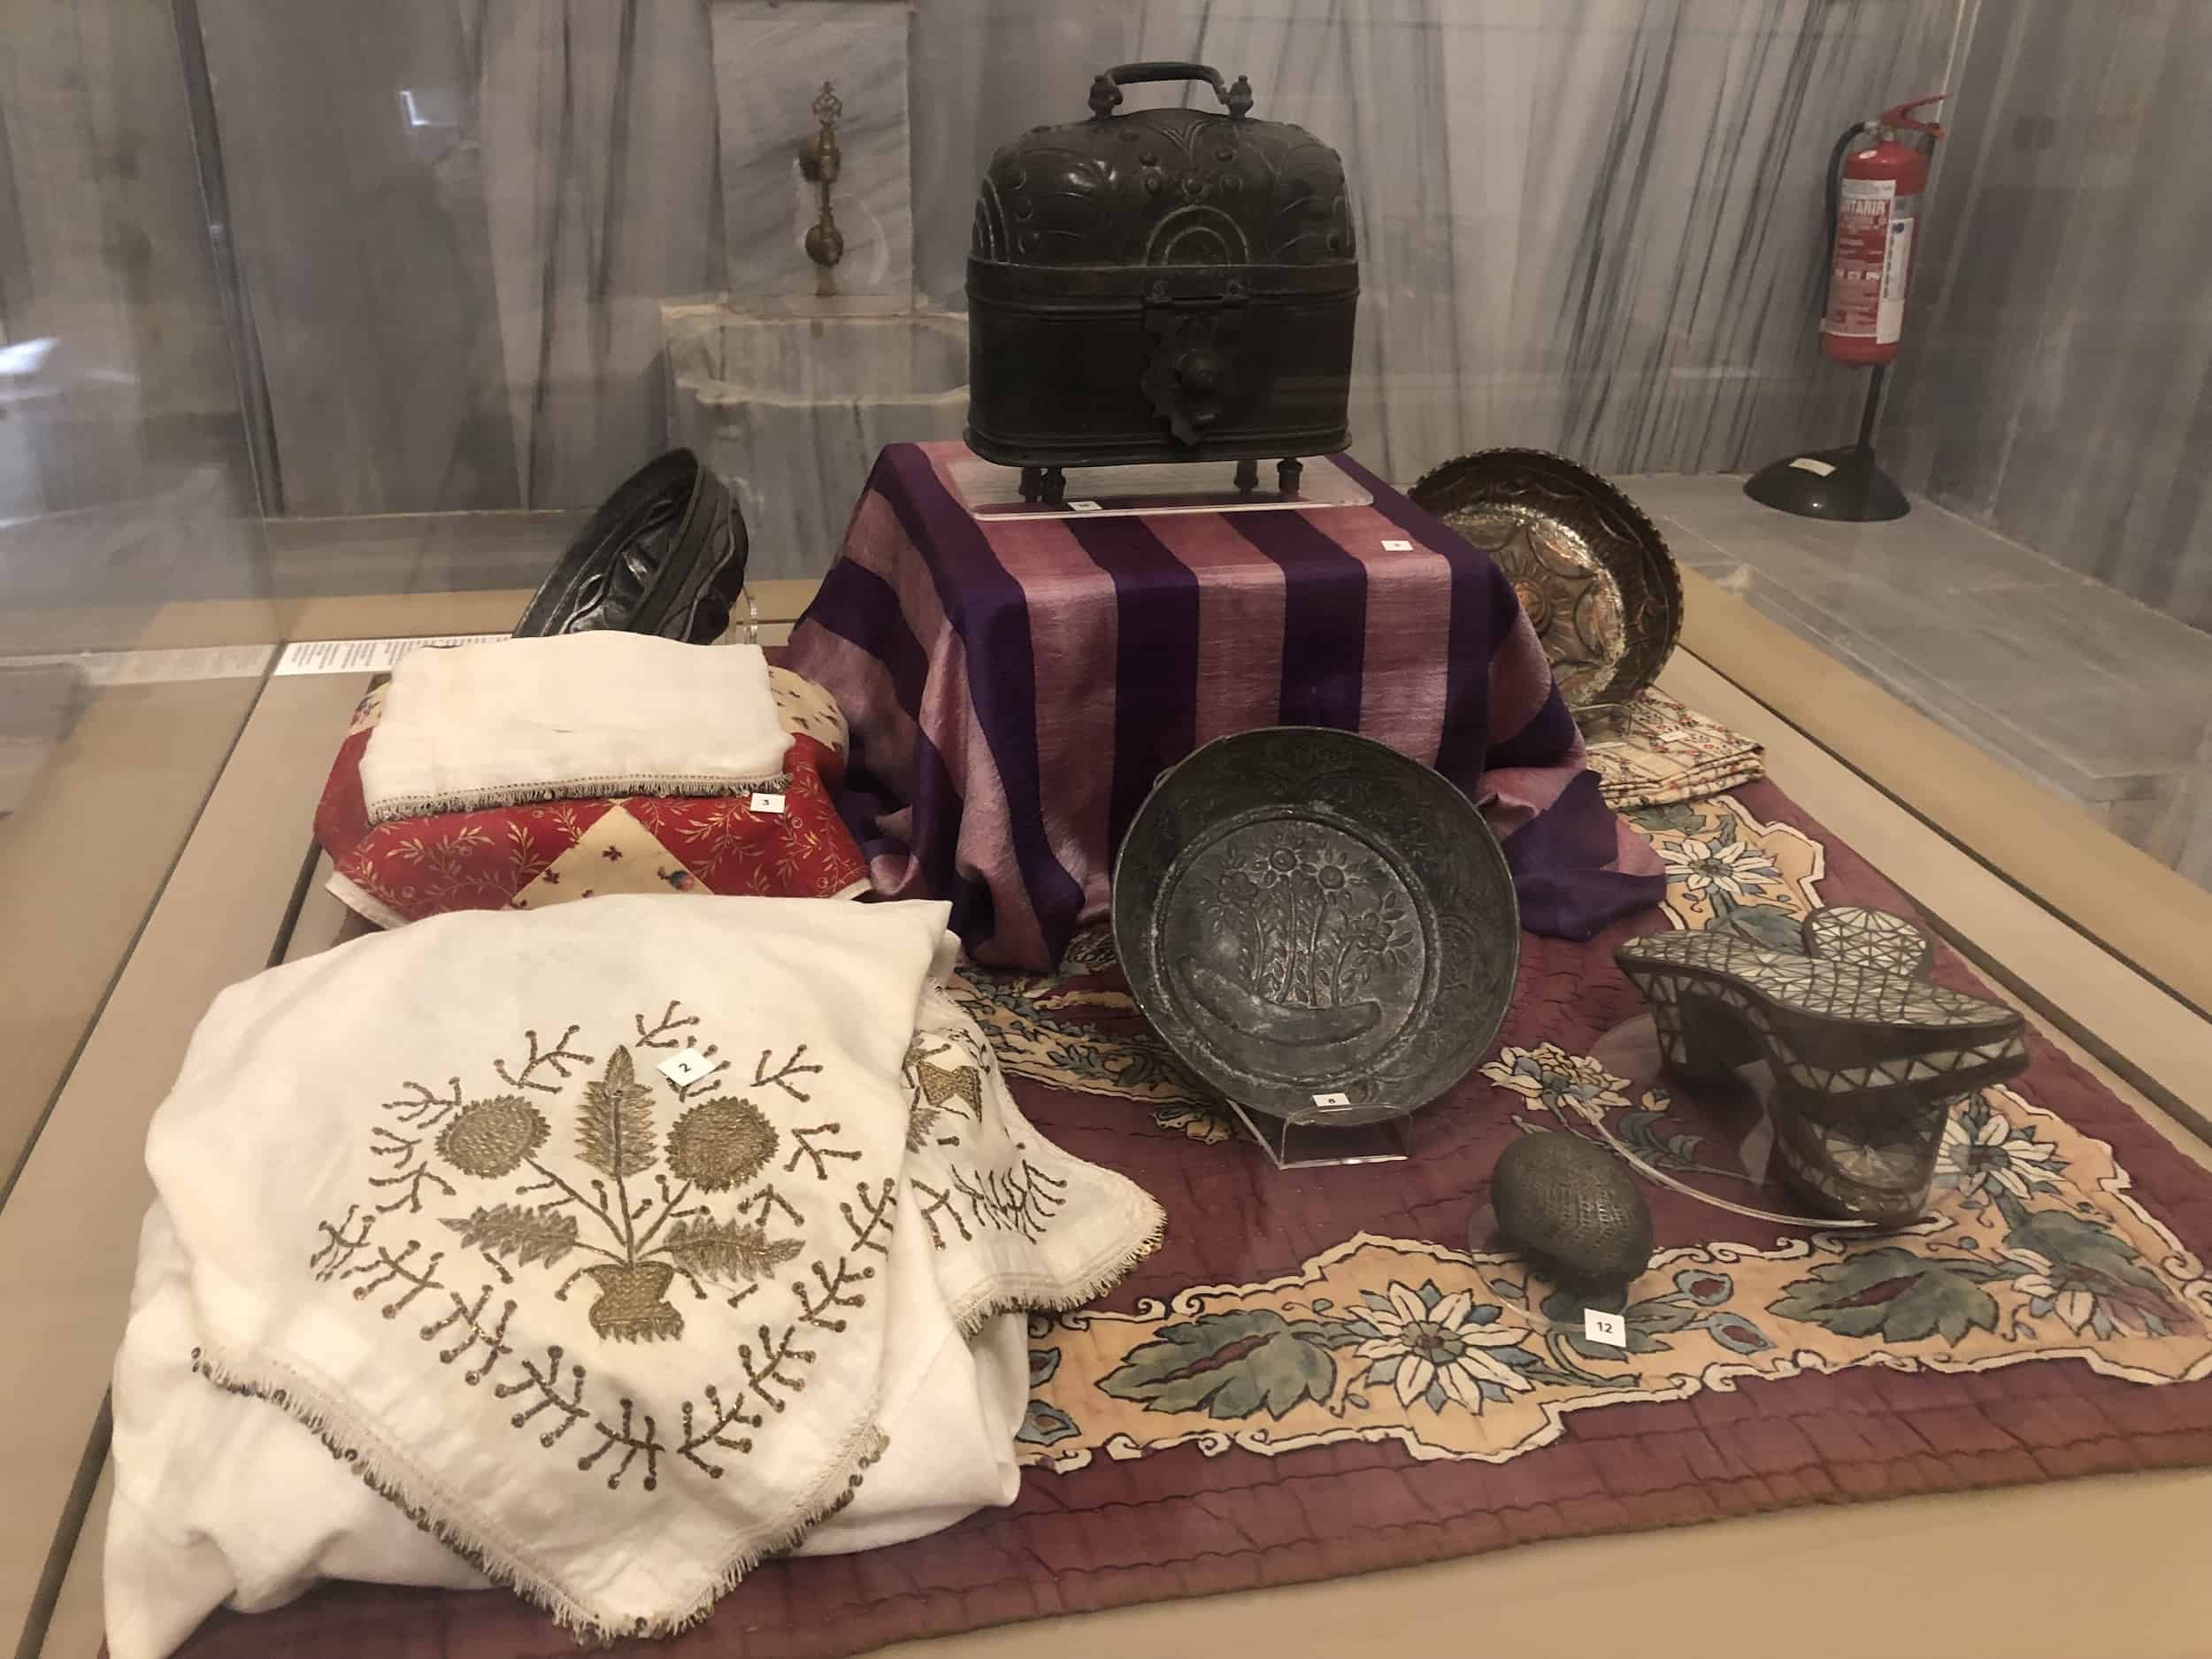 Ethnographic items in the men's hot room at the Bayezid II Hamam (Bayezid II Turkish Bath Cultural Museum) in Beyazıt, Istanbul, Turkey